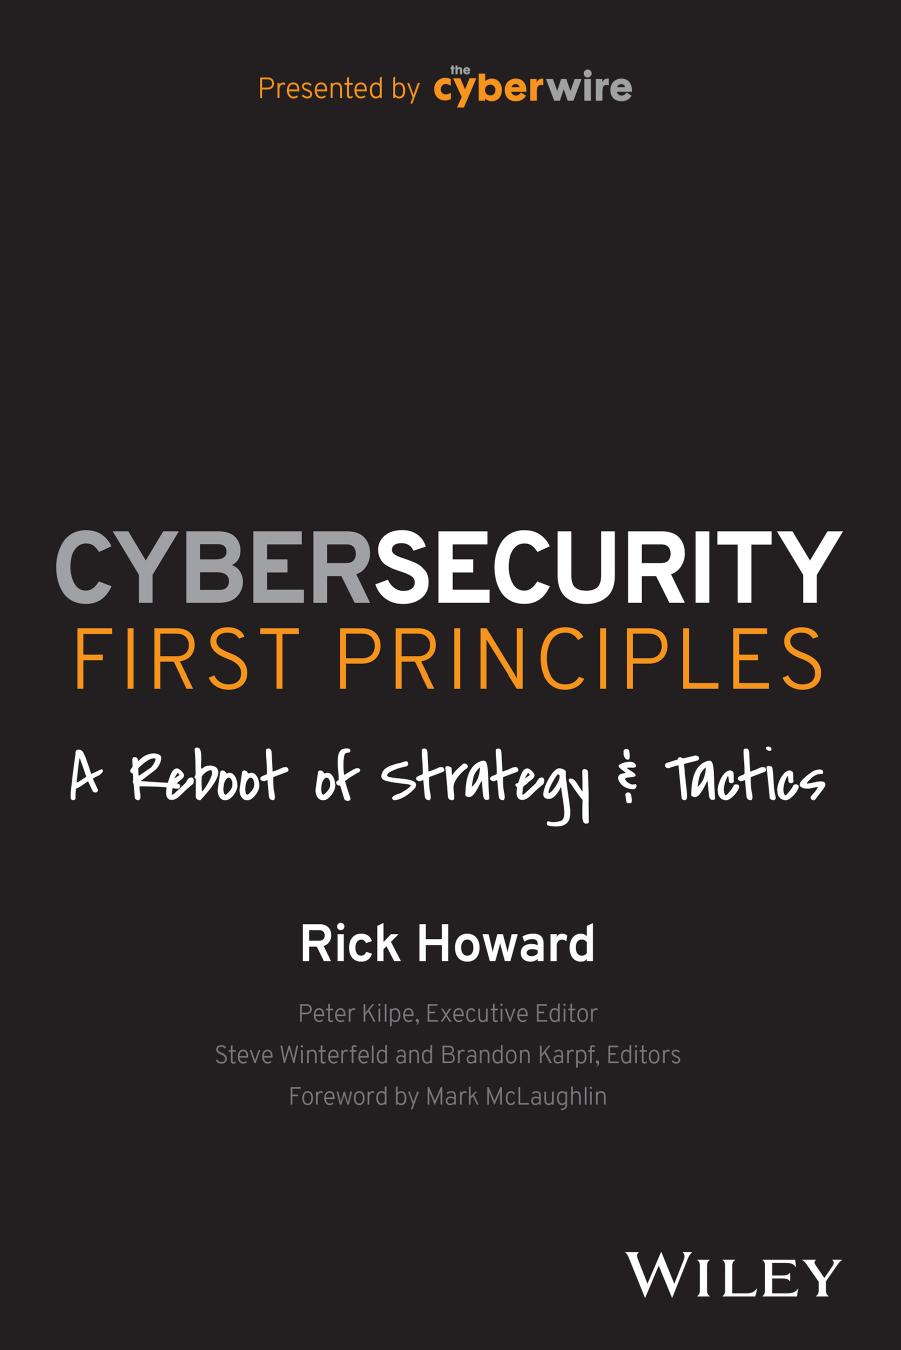 Cybersecurity First Principles by Rick Howard